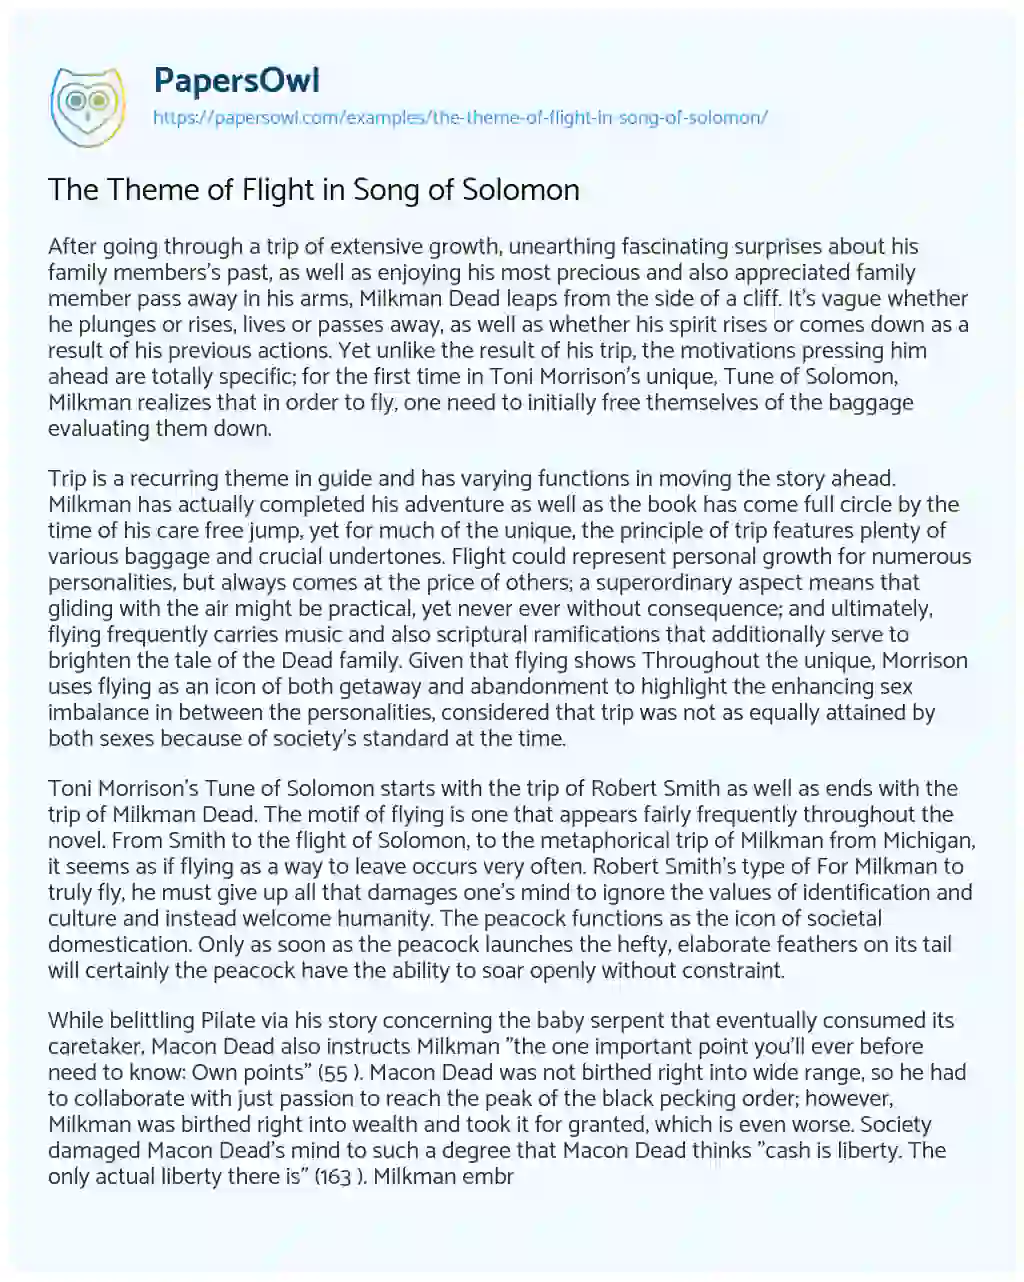 Essay on The Theme of Flight in Song of Solomon